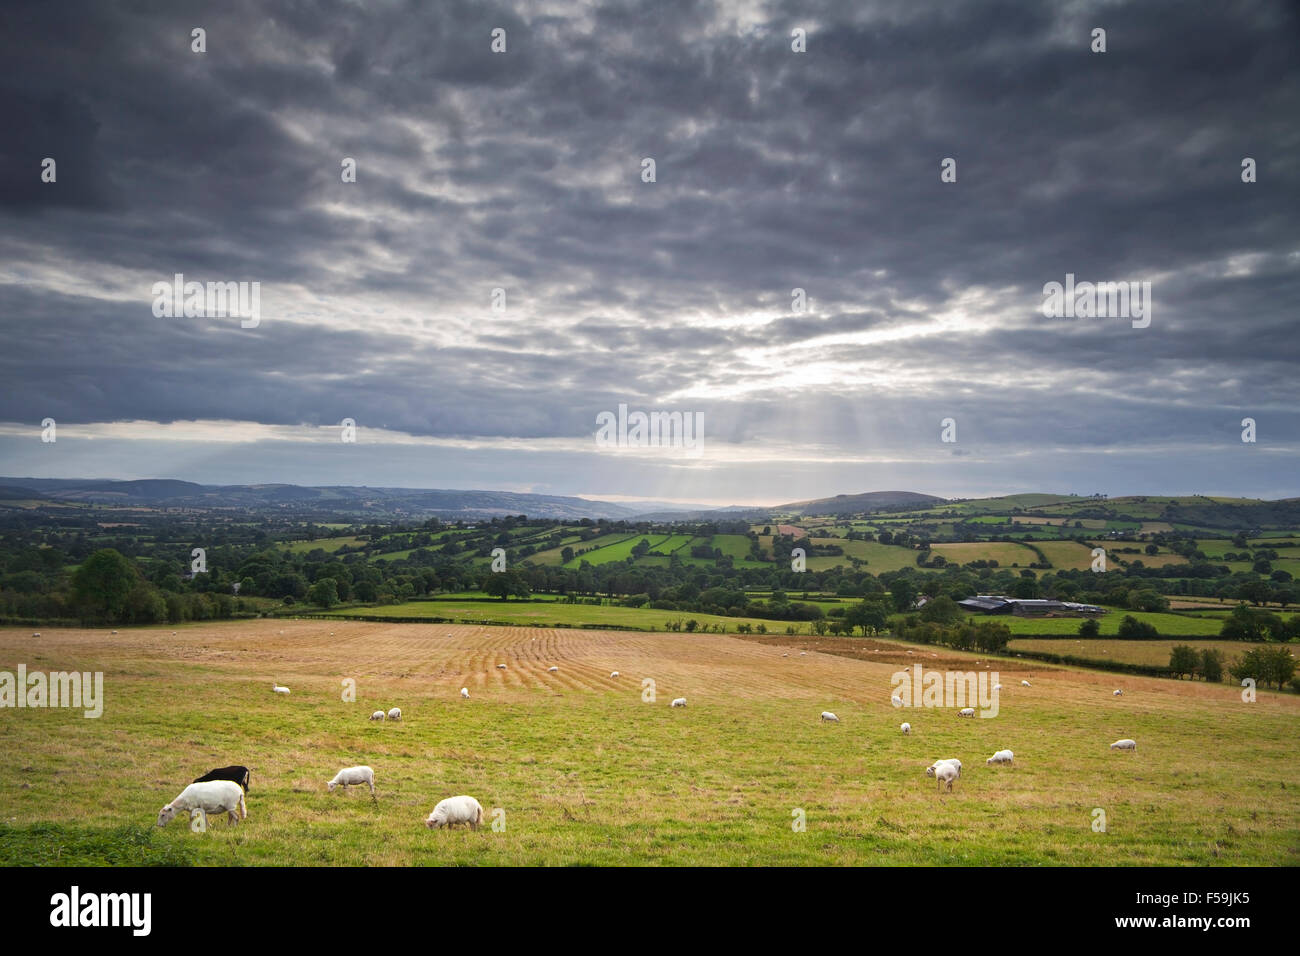 Light Rays Breaking Through Clouds over Hilly Grazing Field Stock Photo